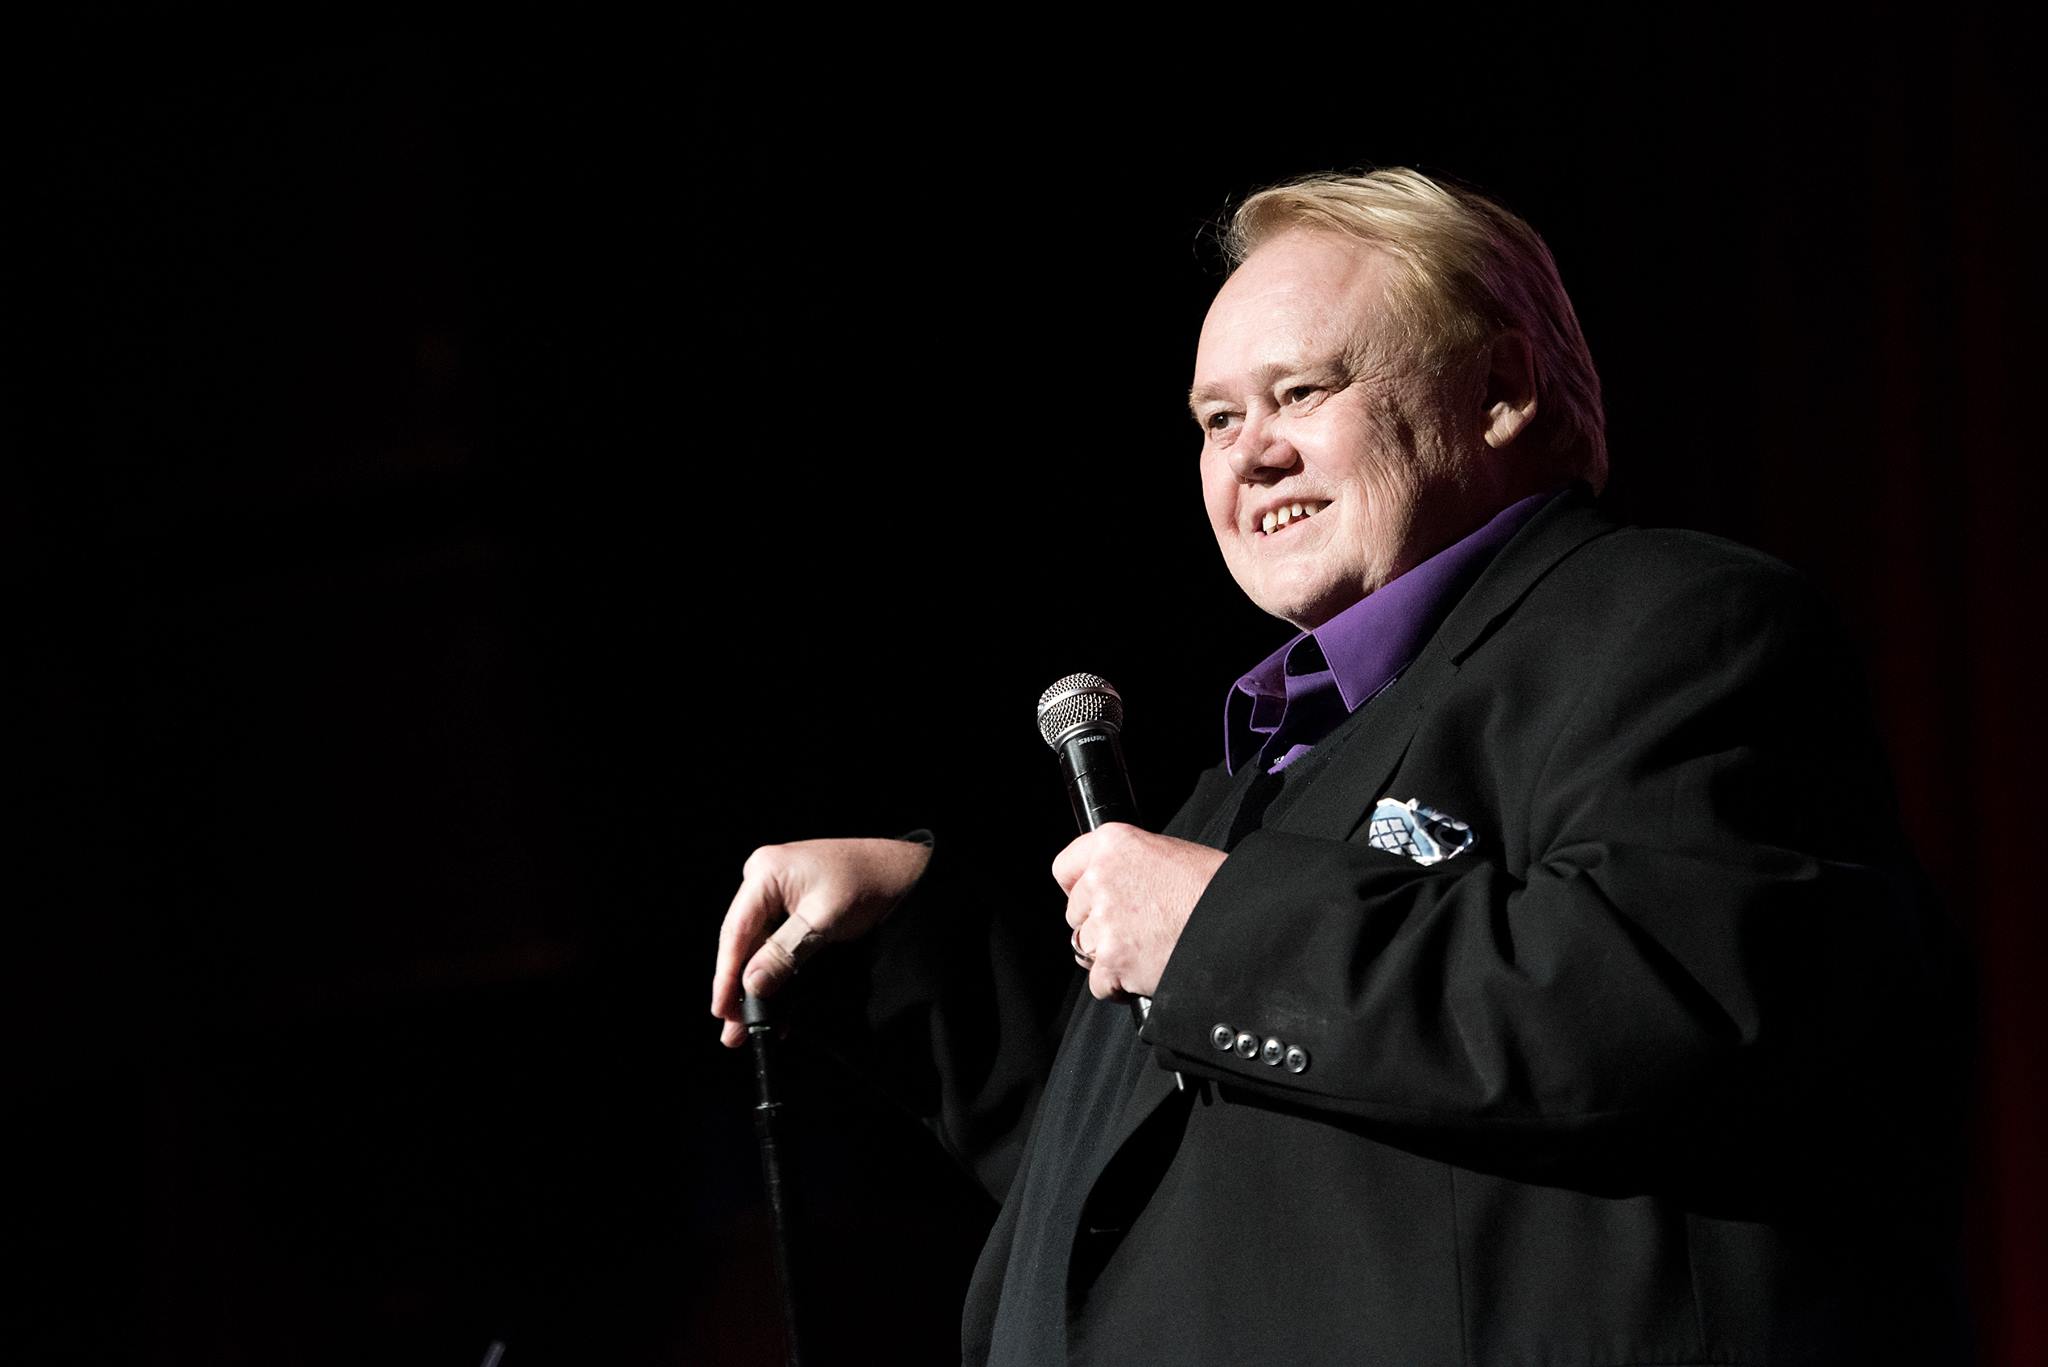 Pick of the Day 8/26: Louie Anderson at the Academy